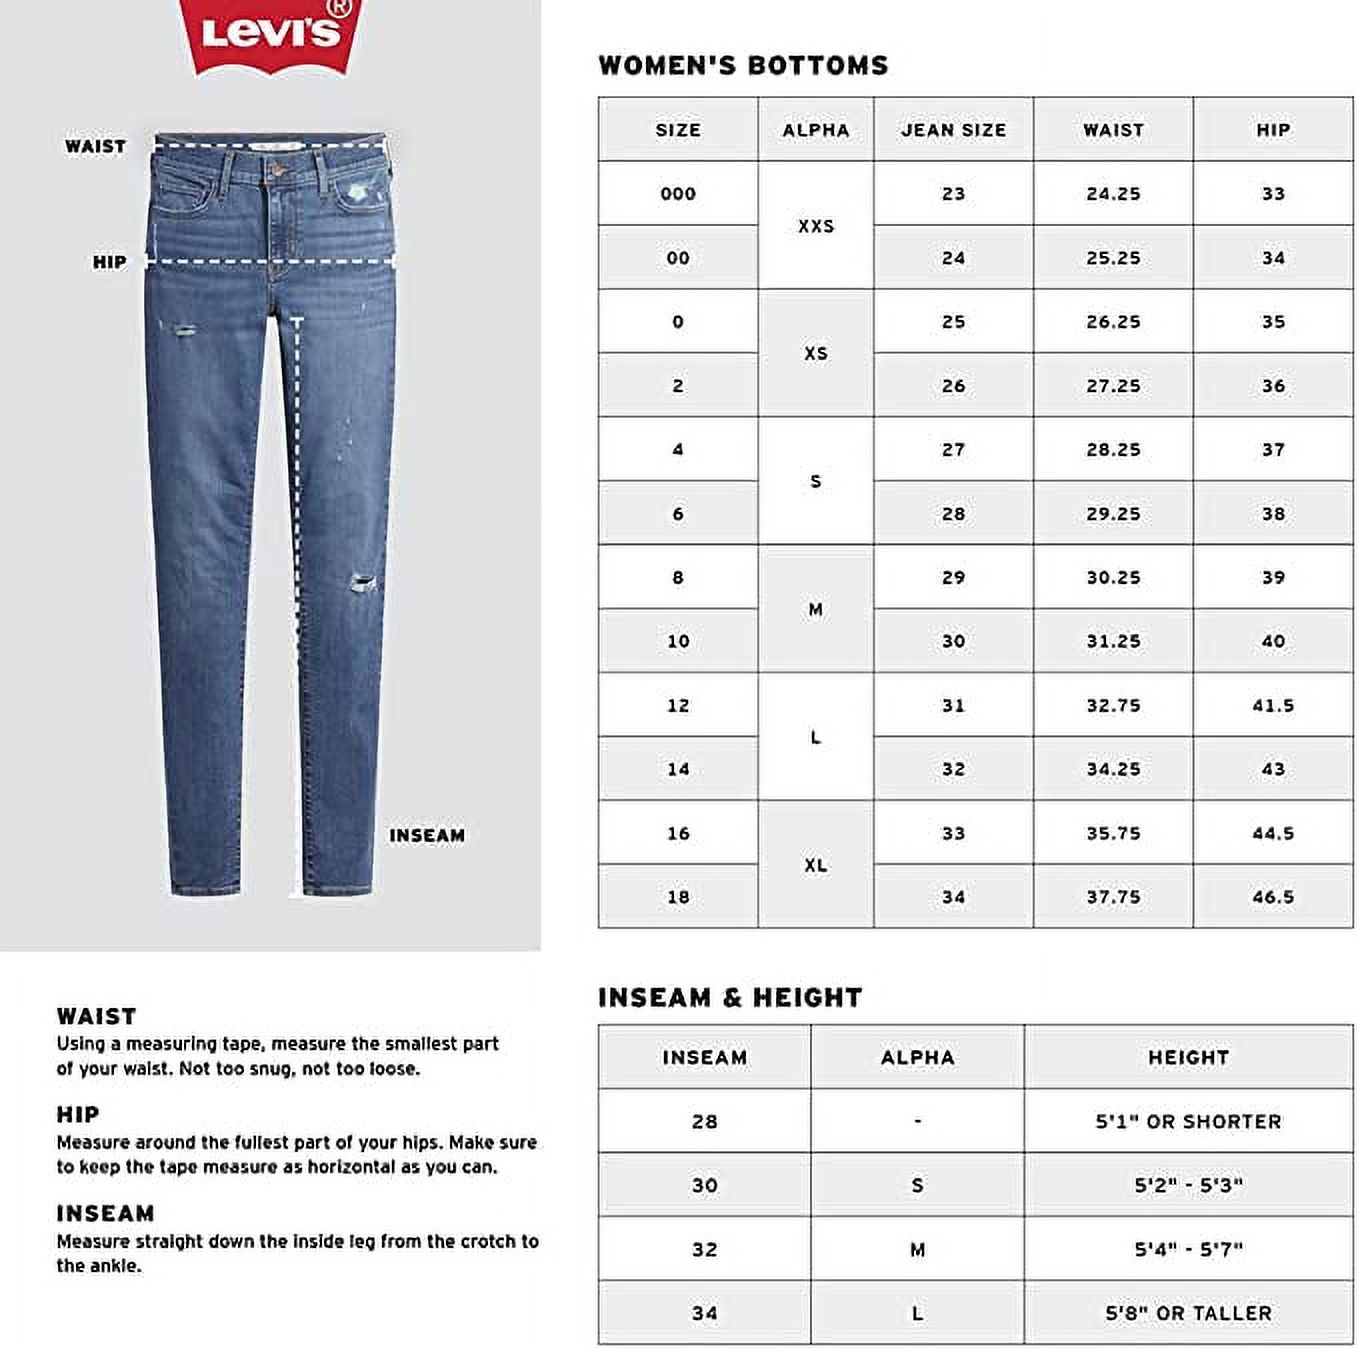 Levi’s Original Red Tab Women's 311 Shaping Skinny Jeans - image 4 of 4